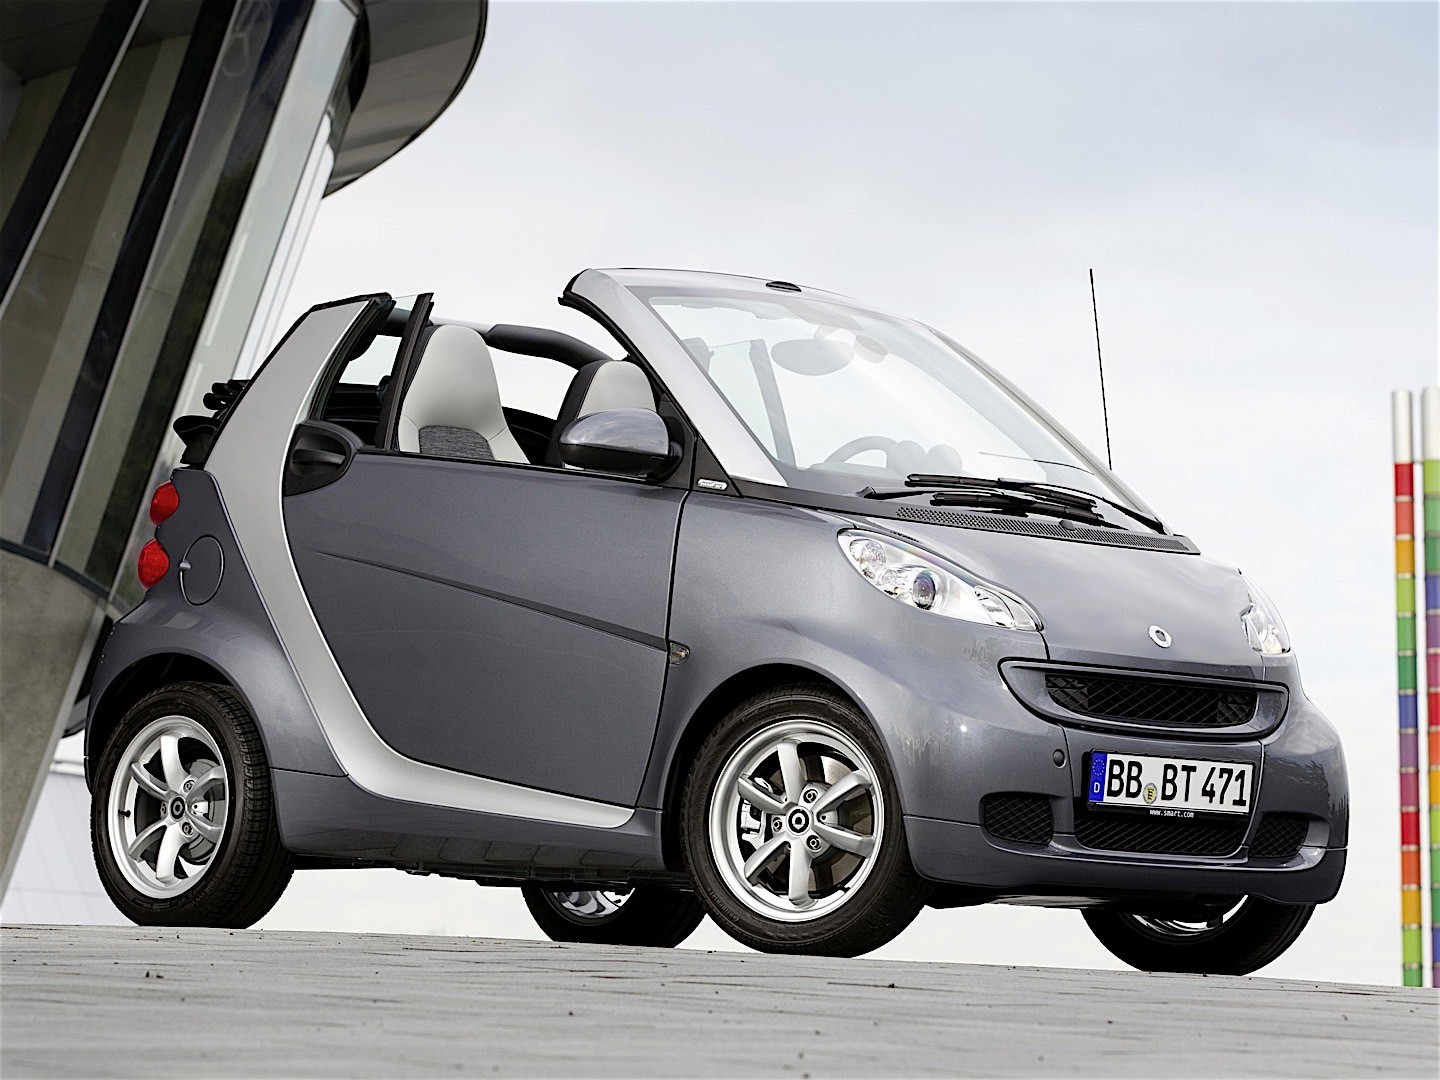 07> Owner`s Manual 2010 Smart Fortwo Coupe and Cabrio Seiten: 172 